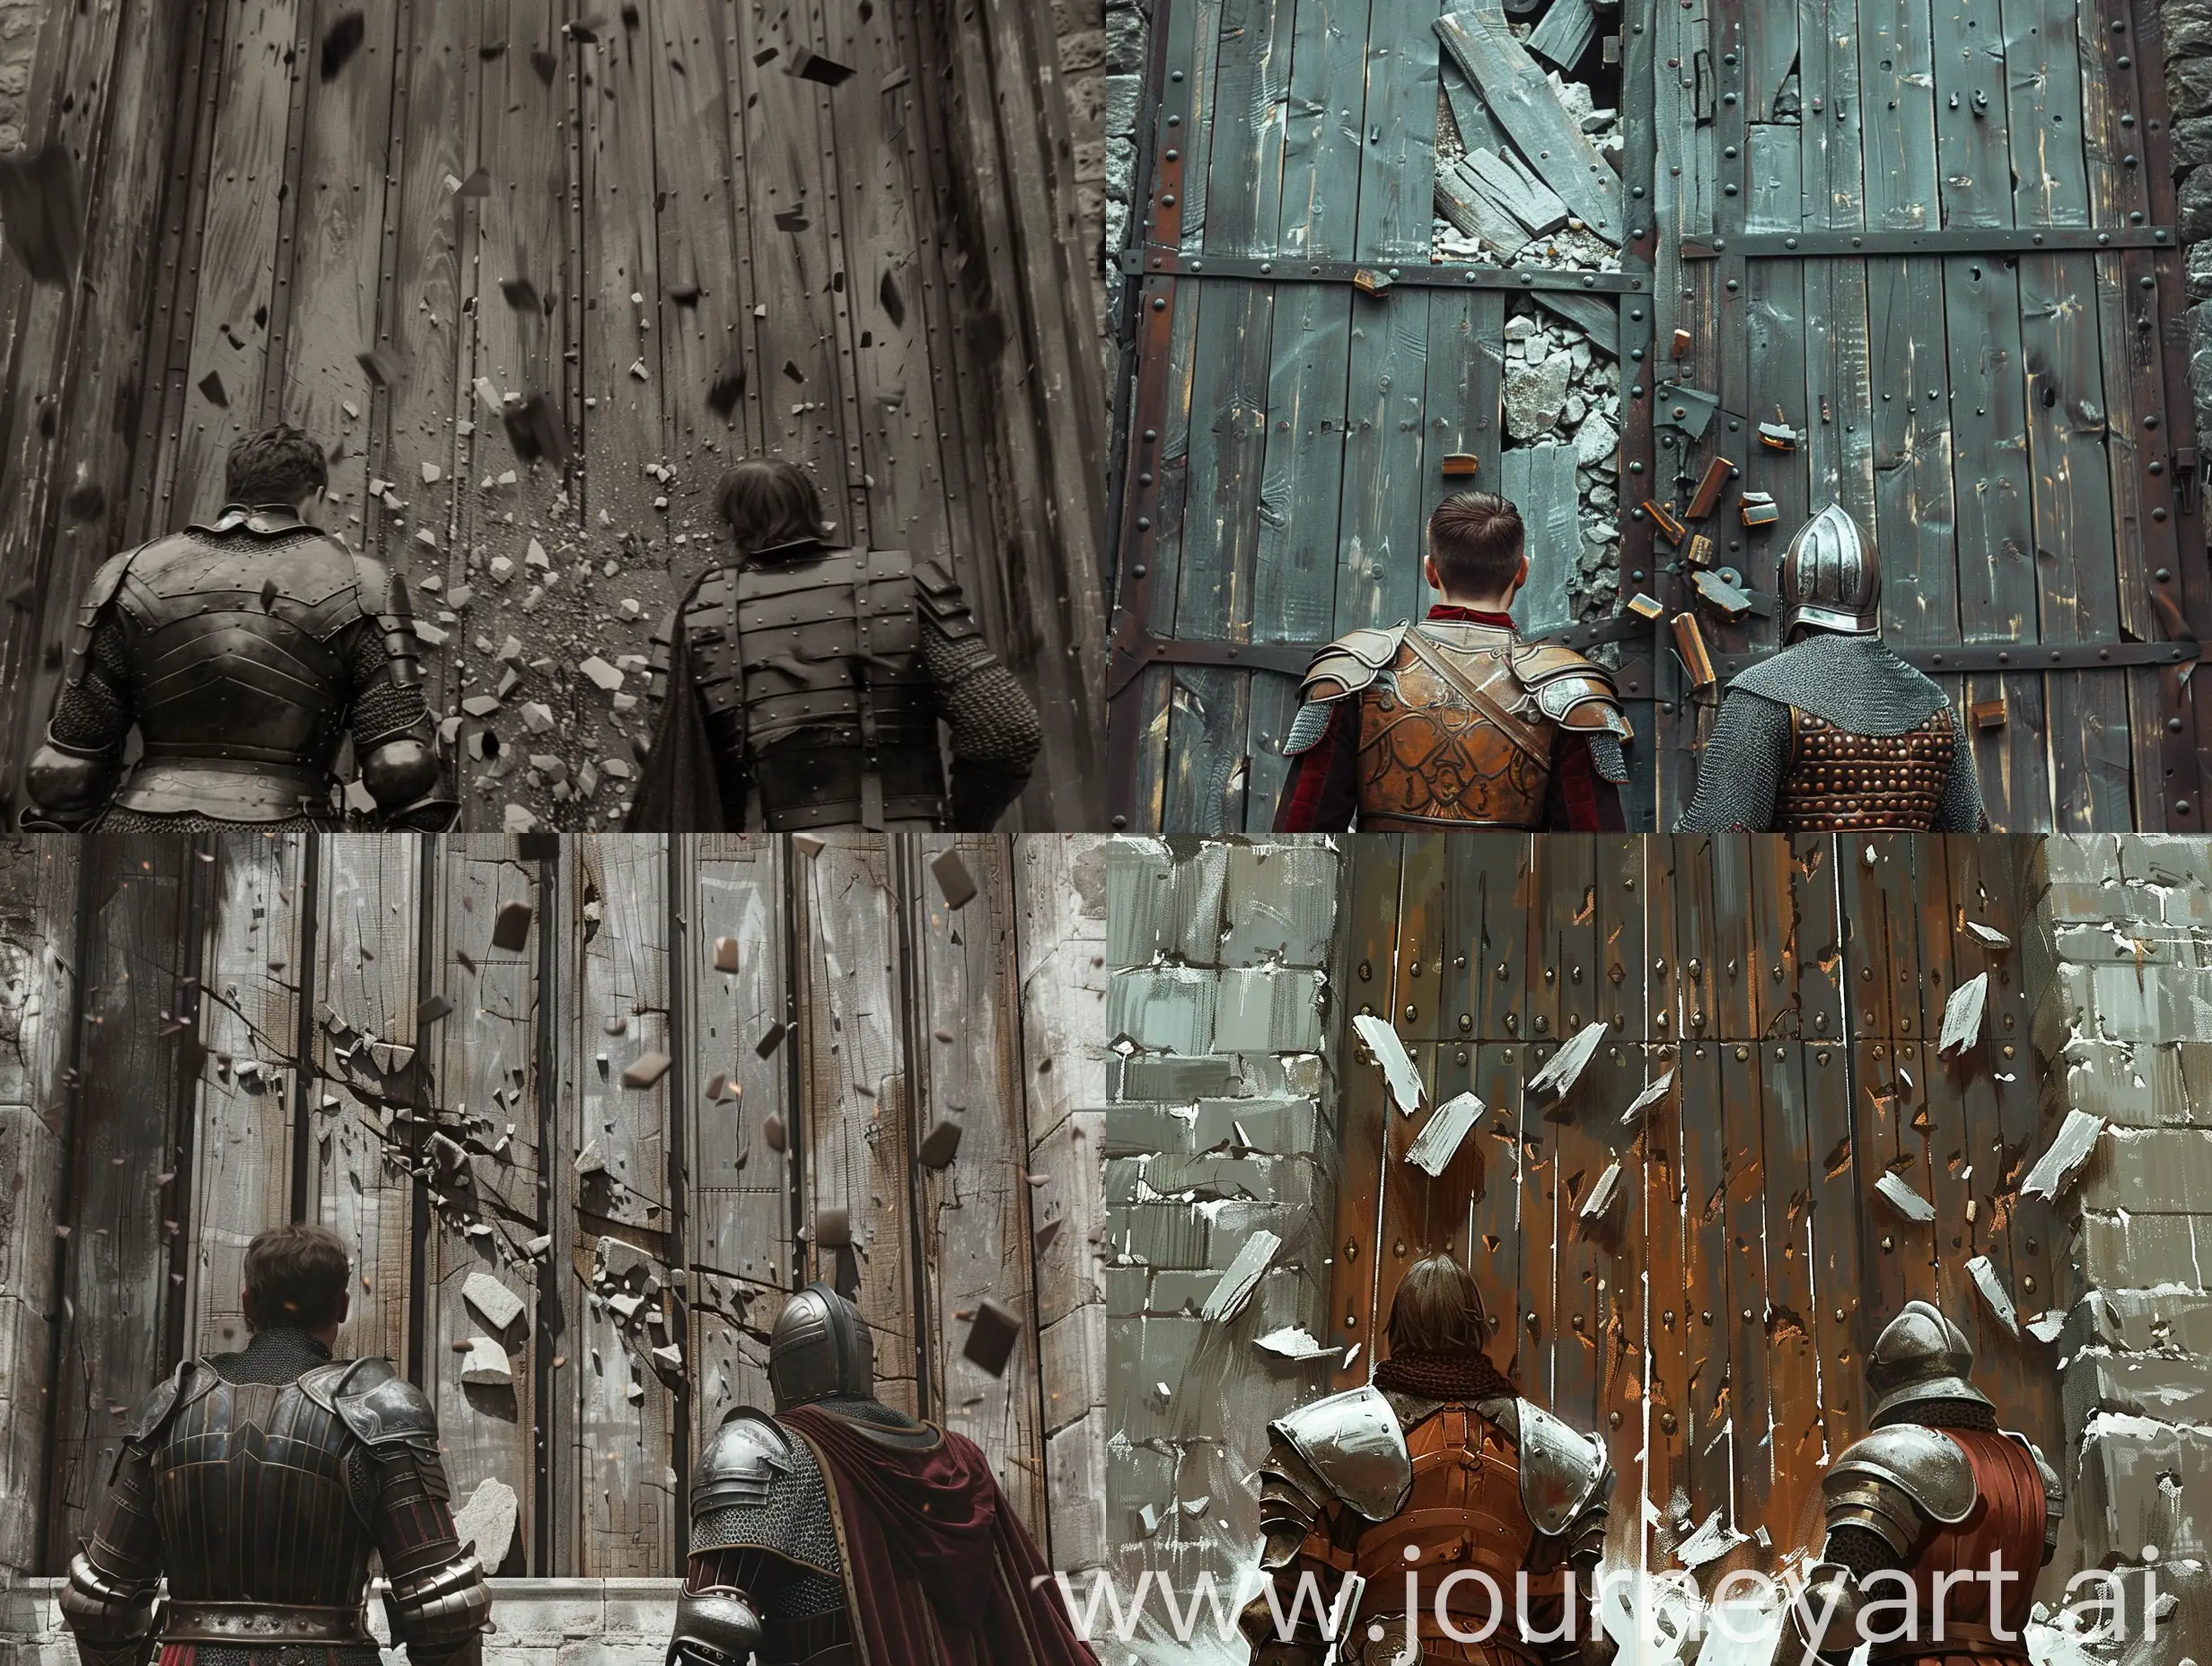 Two men in armor, from the back, stand in front of a high wooden door that has shattered into splinters